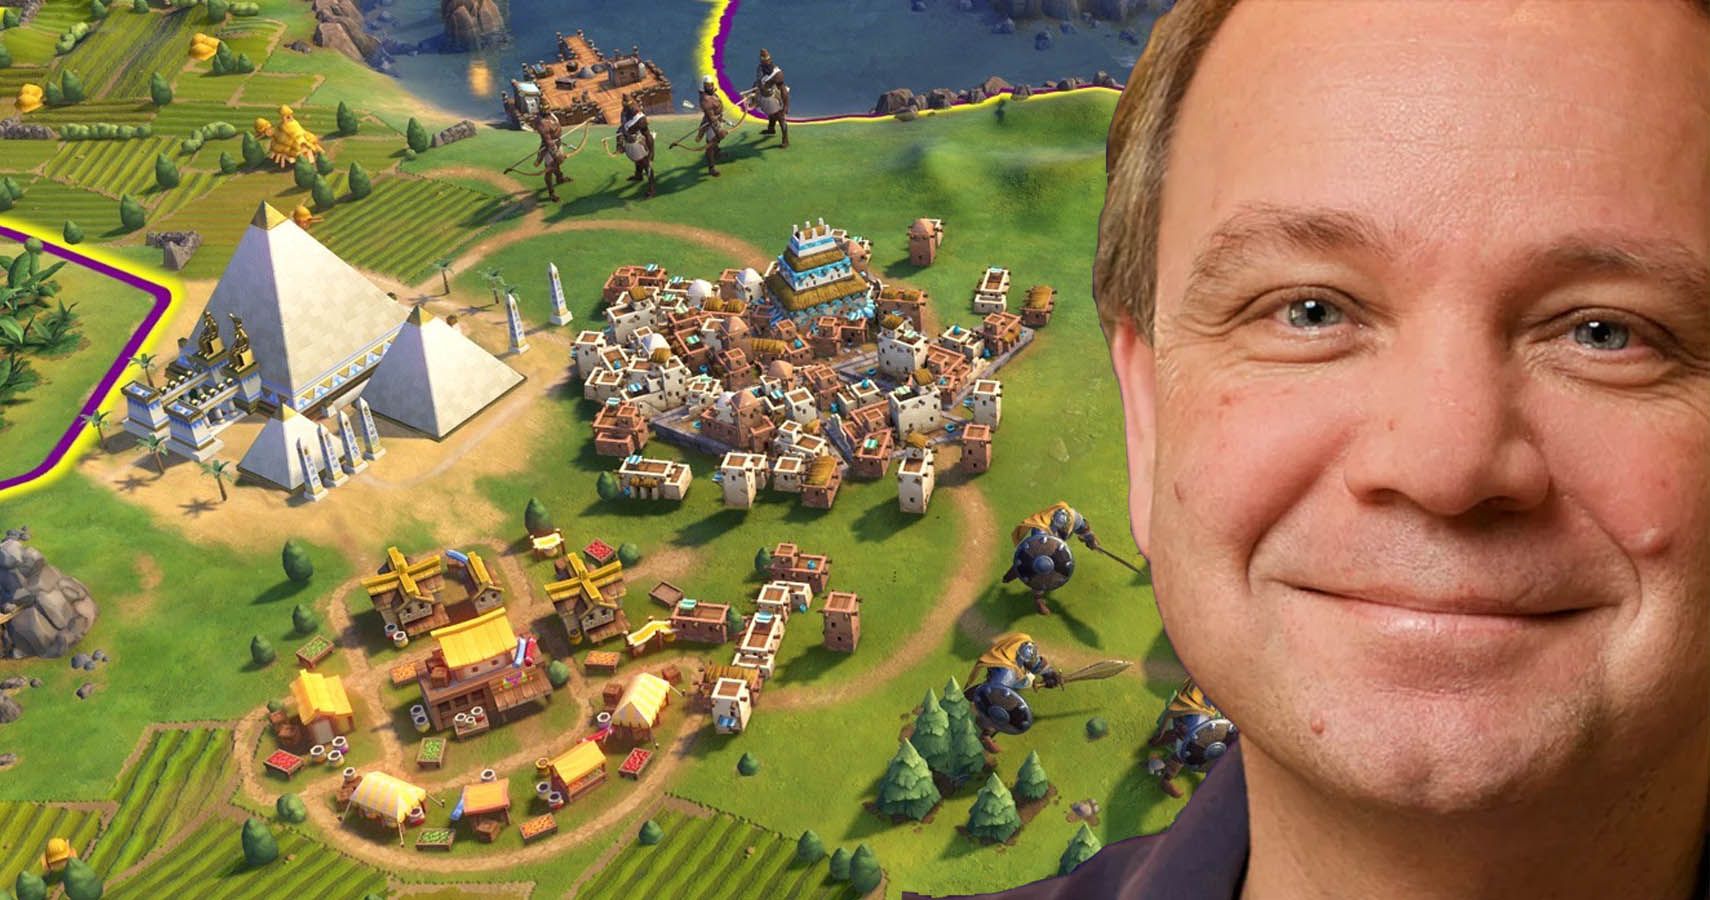 Sid Meier Says That Games Should Focus On The Fun Rather Than The Money